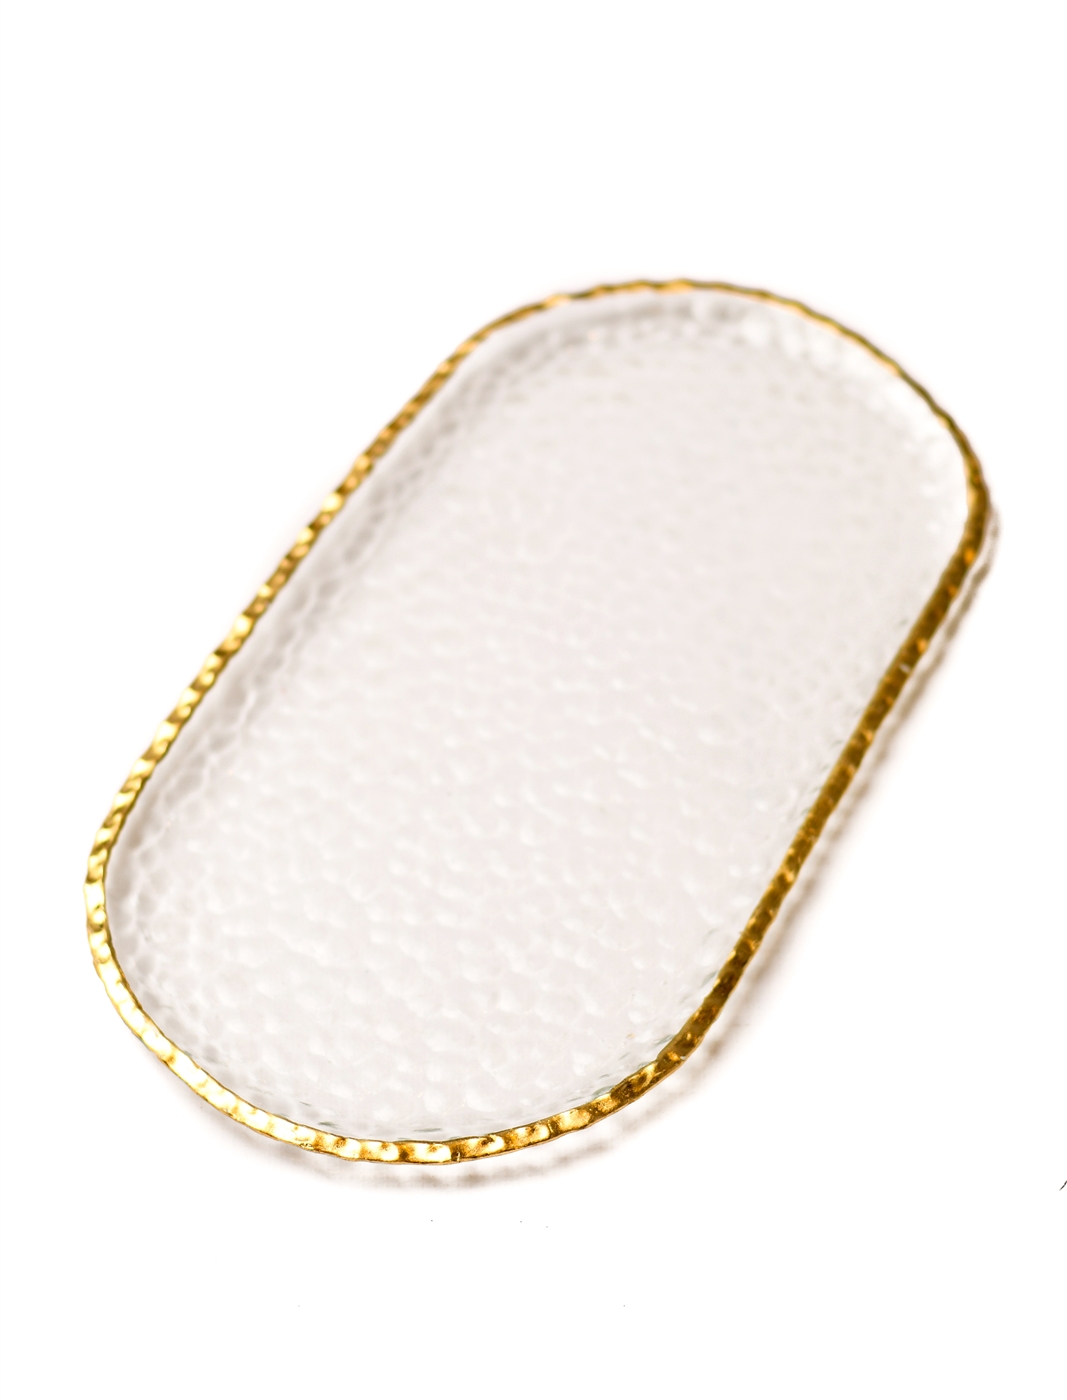 Clear Oblong Glass Tray with Gold Rim-LG